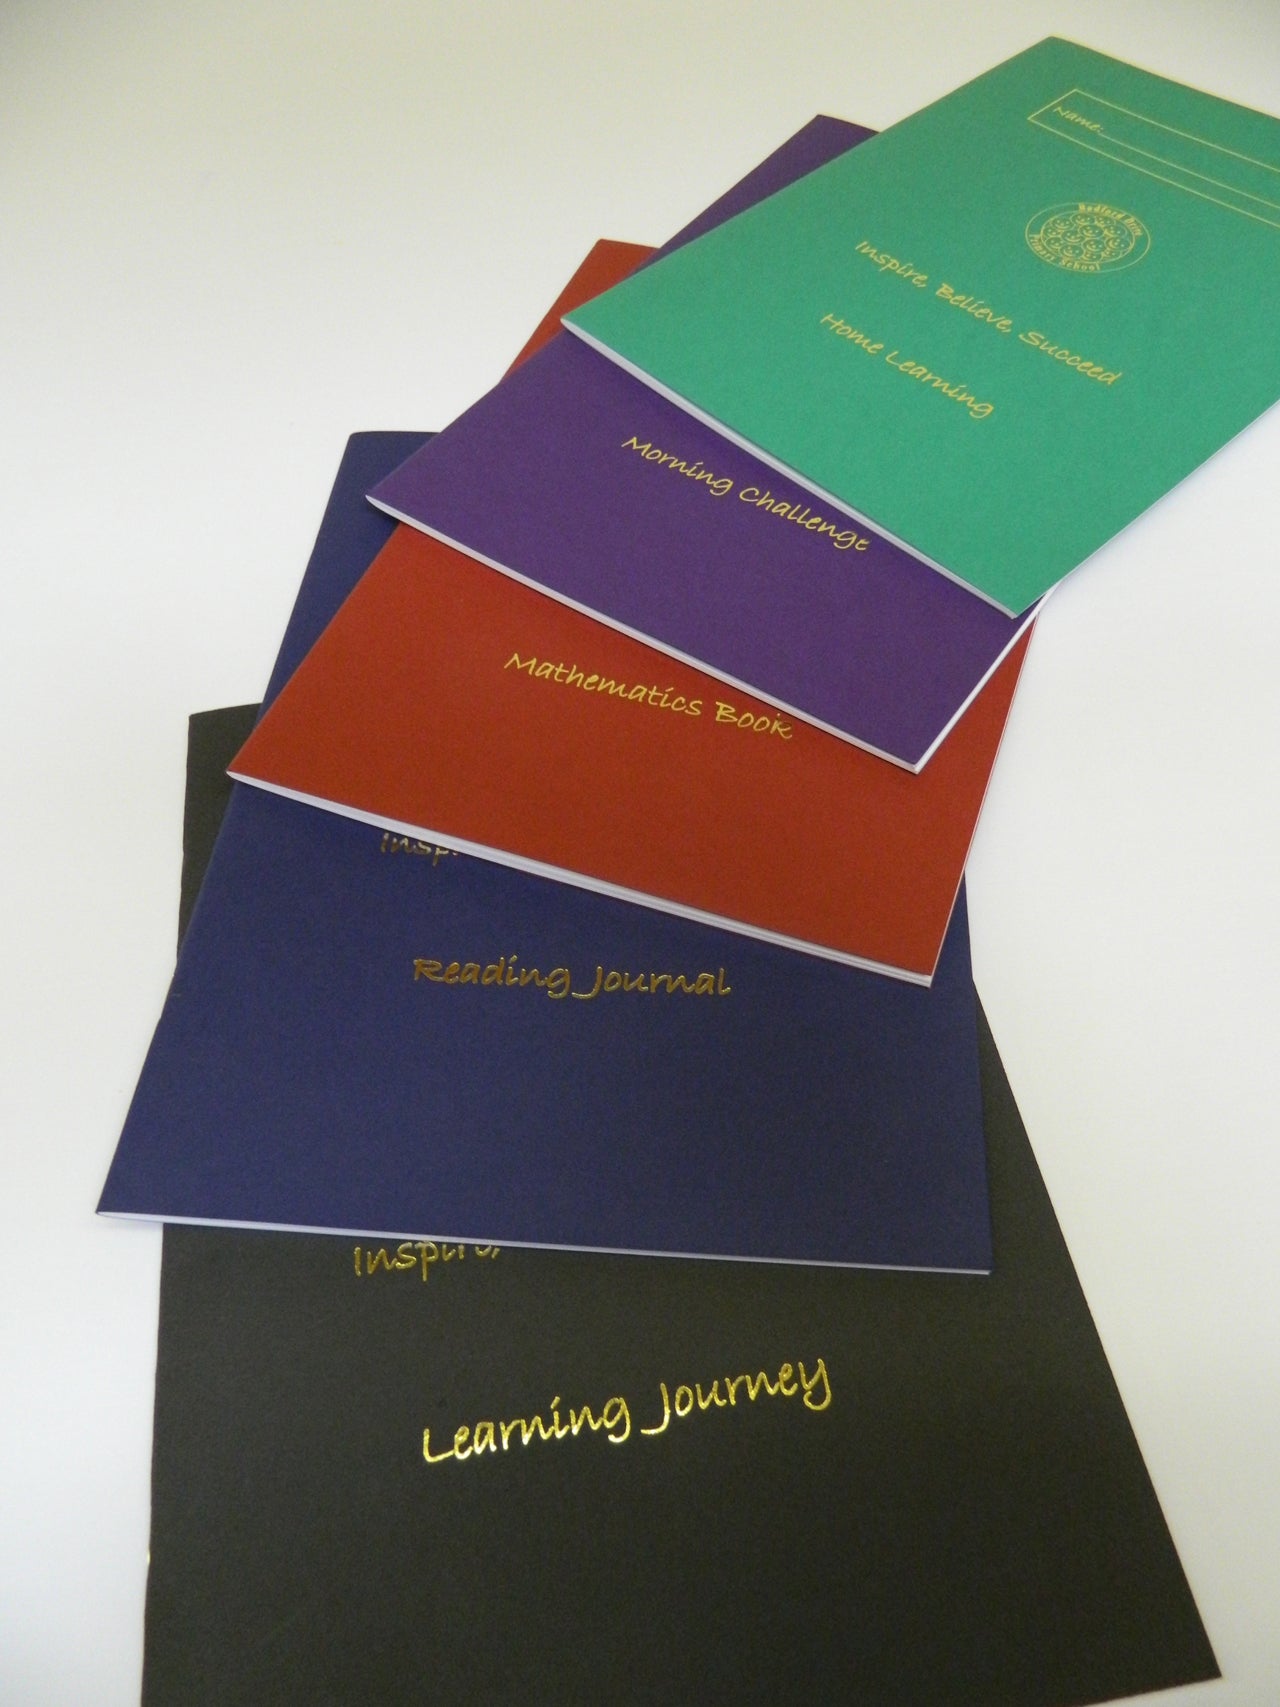 Selection of different coloured sketch books showing foil blocked logo